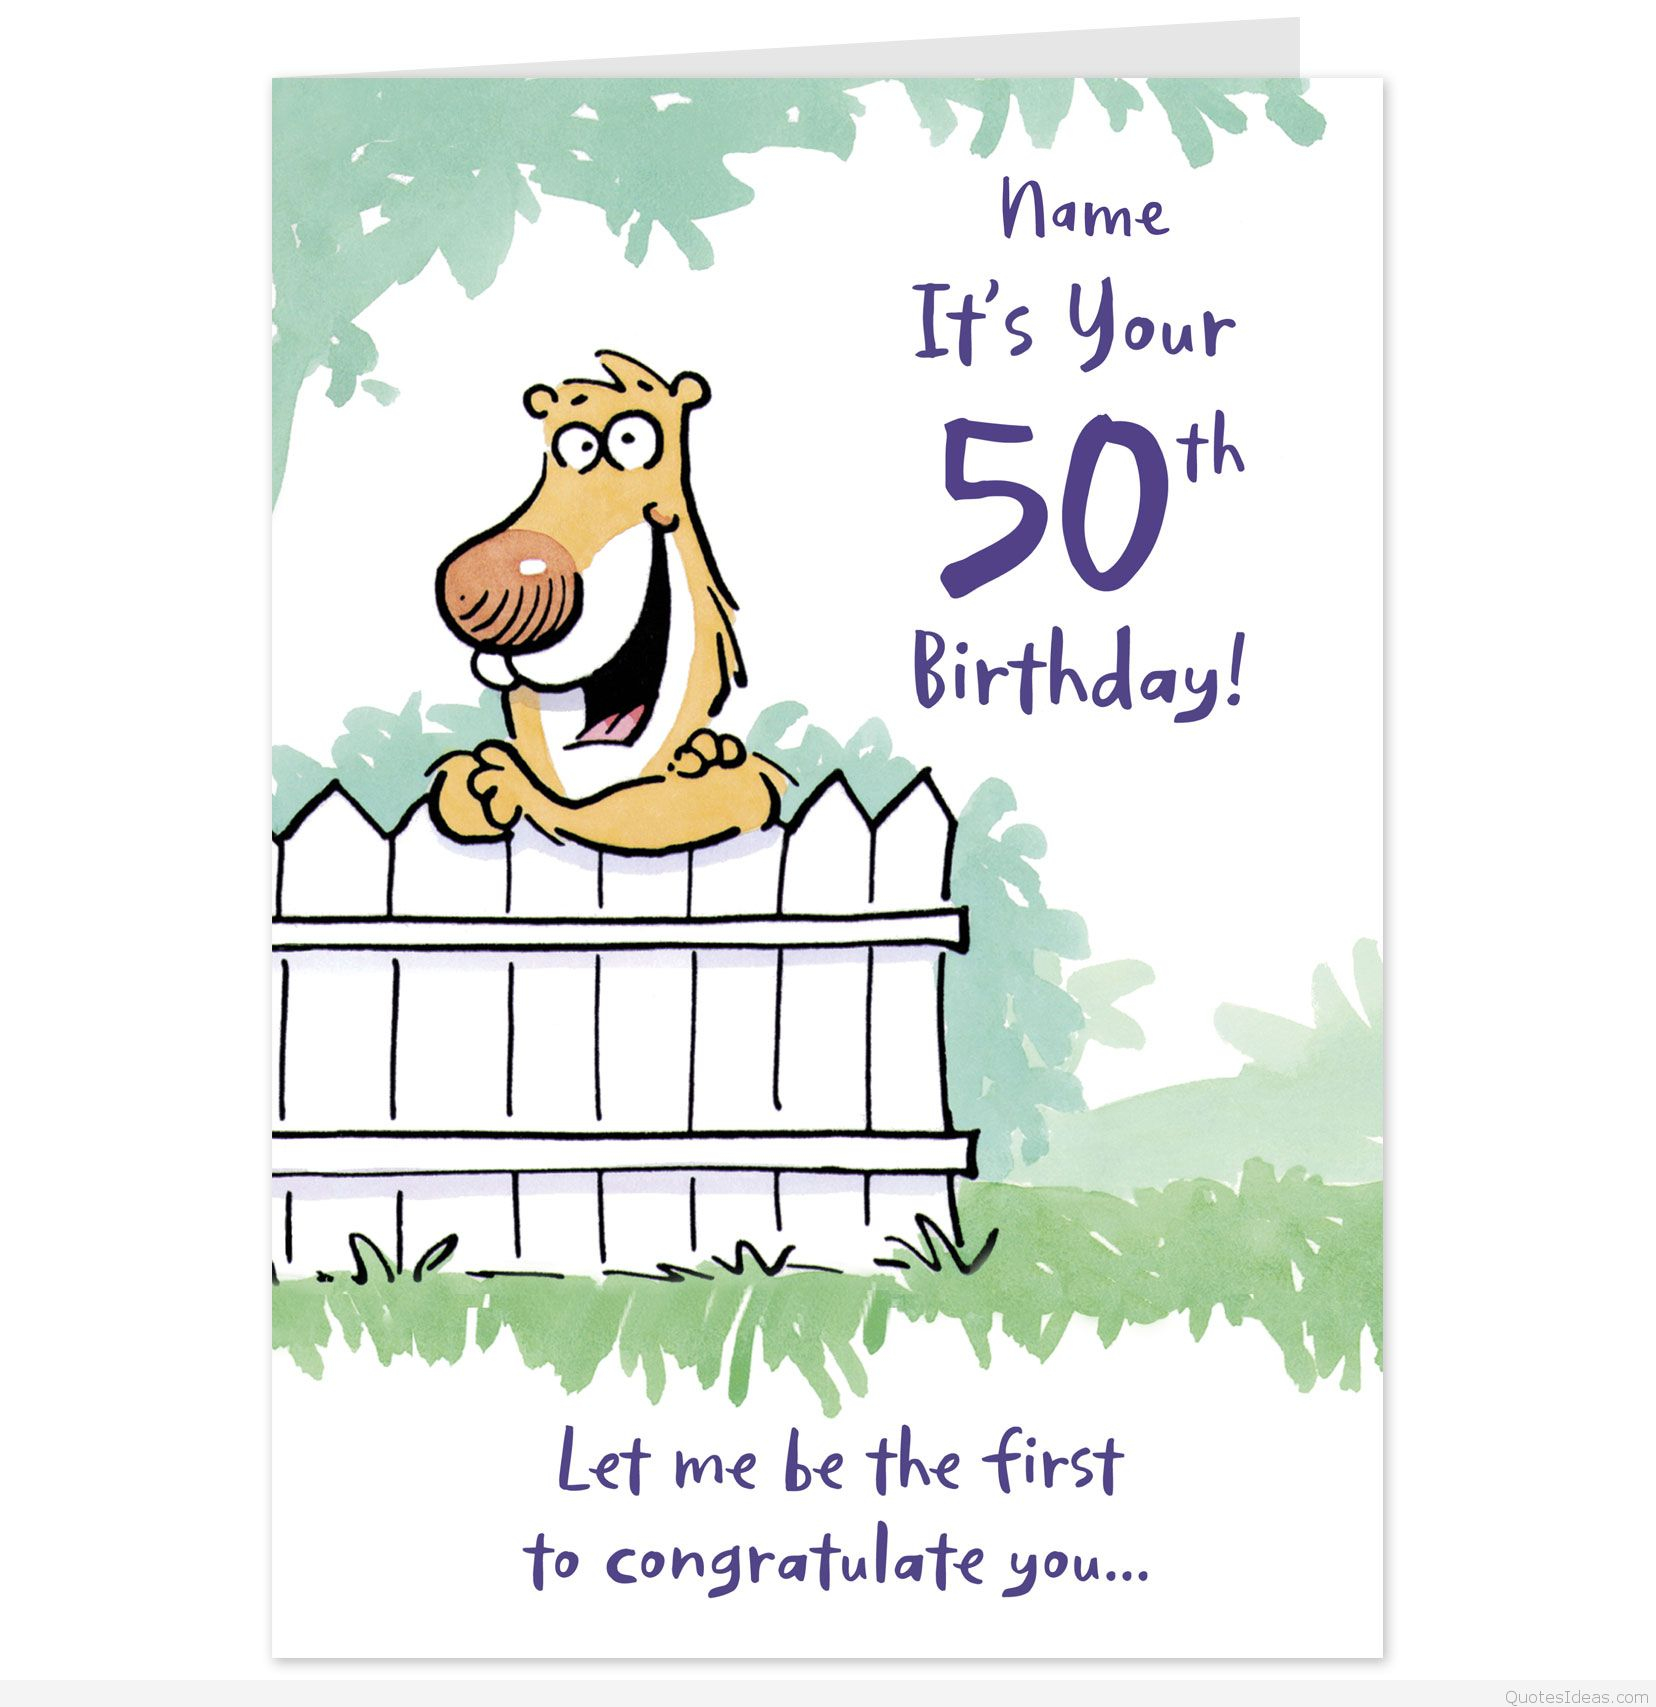 Ideas For Birthday Card Messages 99 Funny 50th Birthday Sayings For Cards 50th Birthday Card